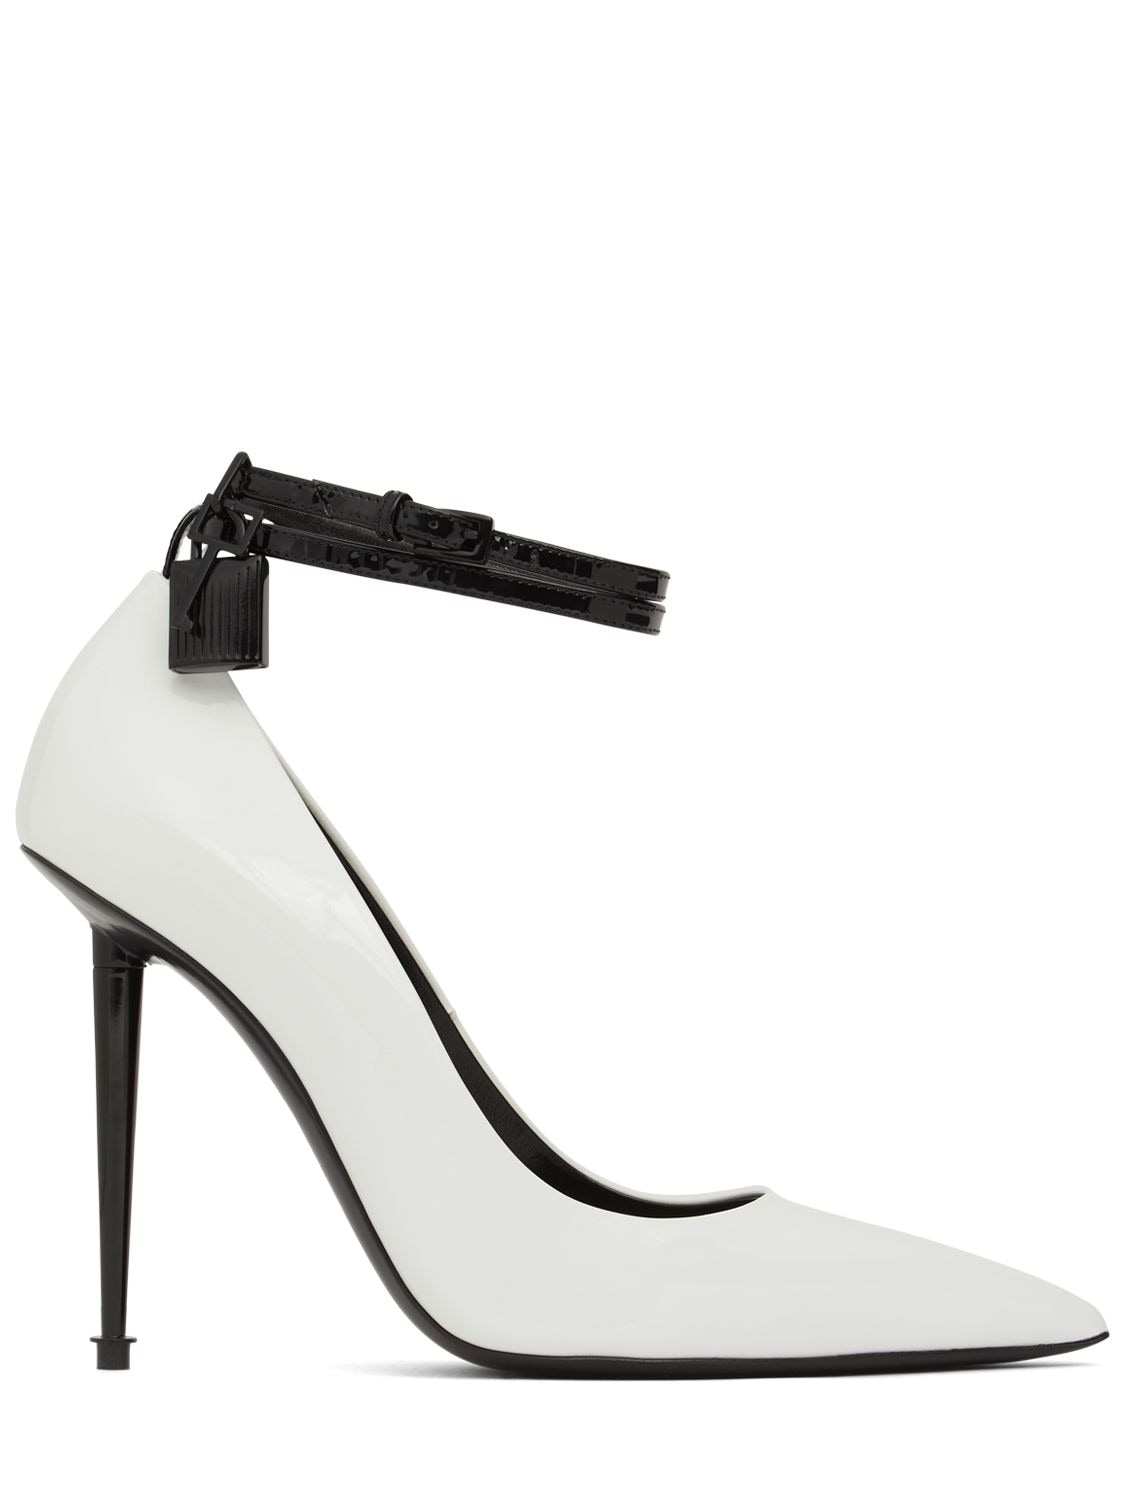 TOM FORD 105mm Padlock Leather Pumps